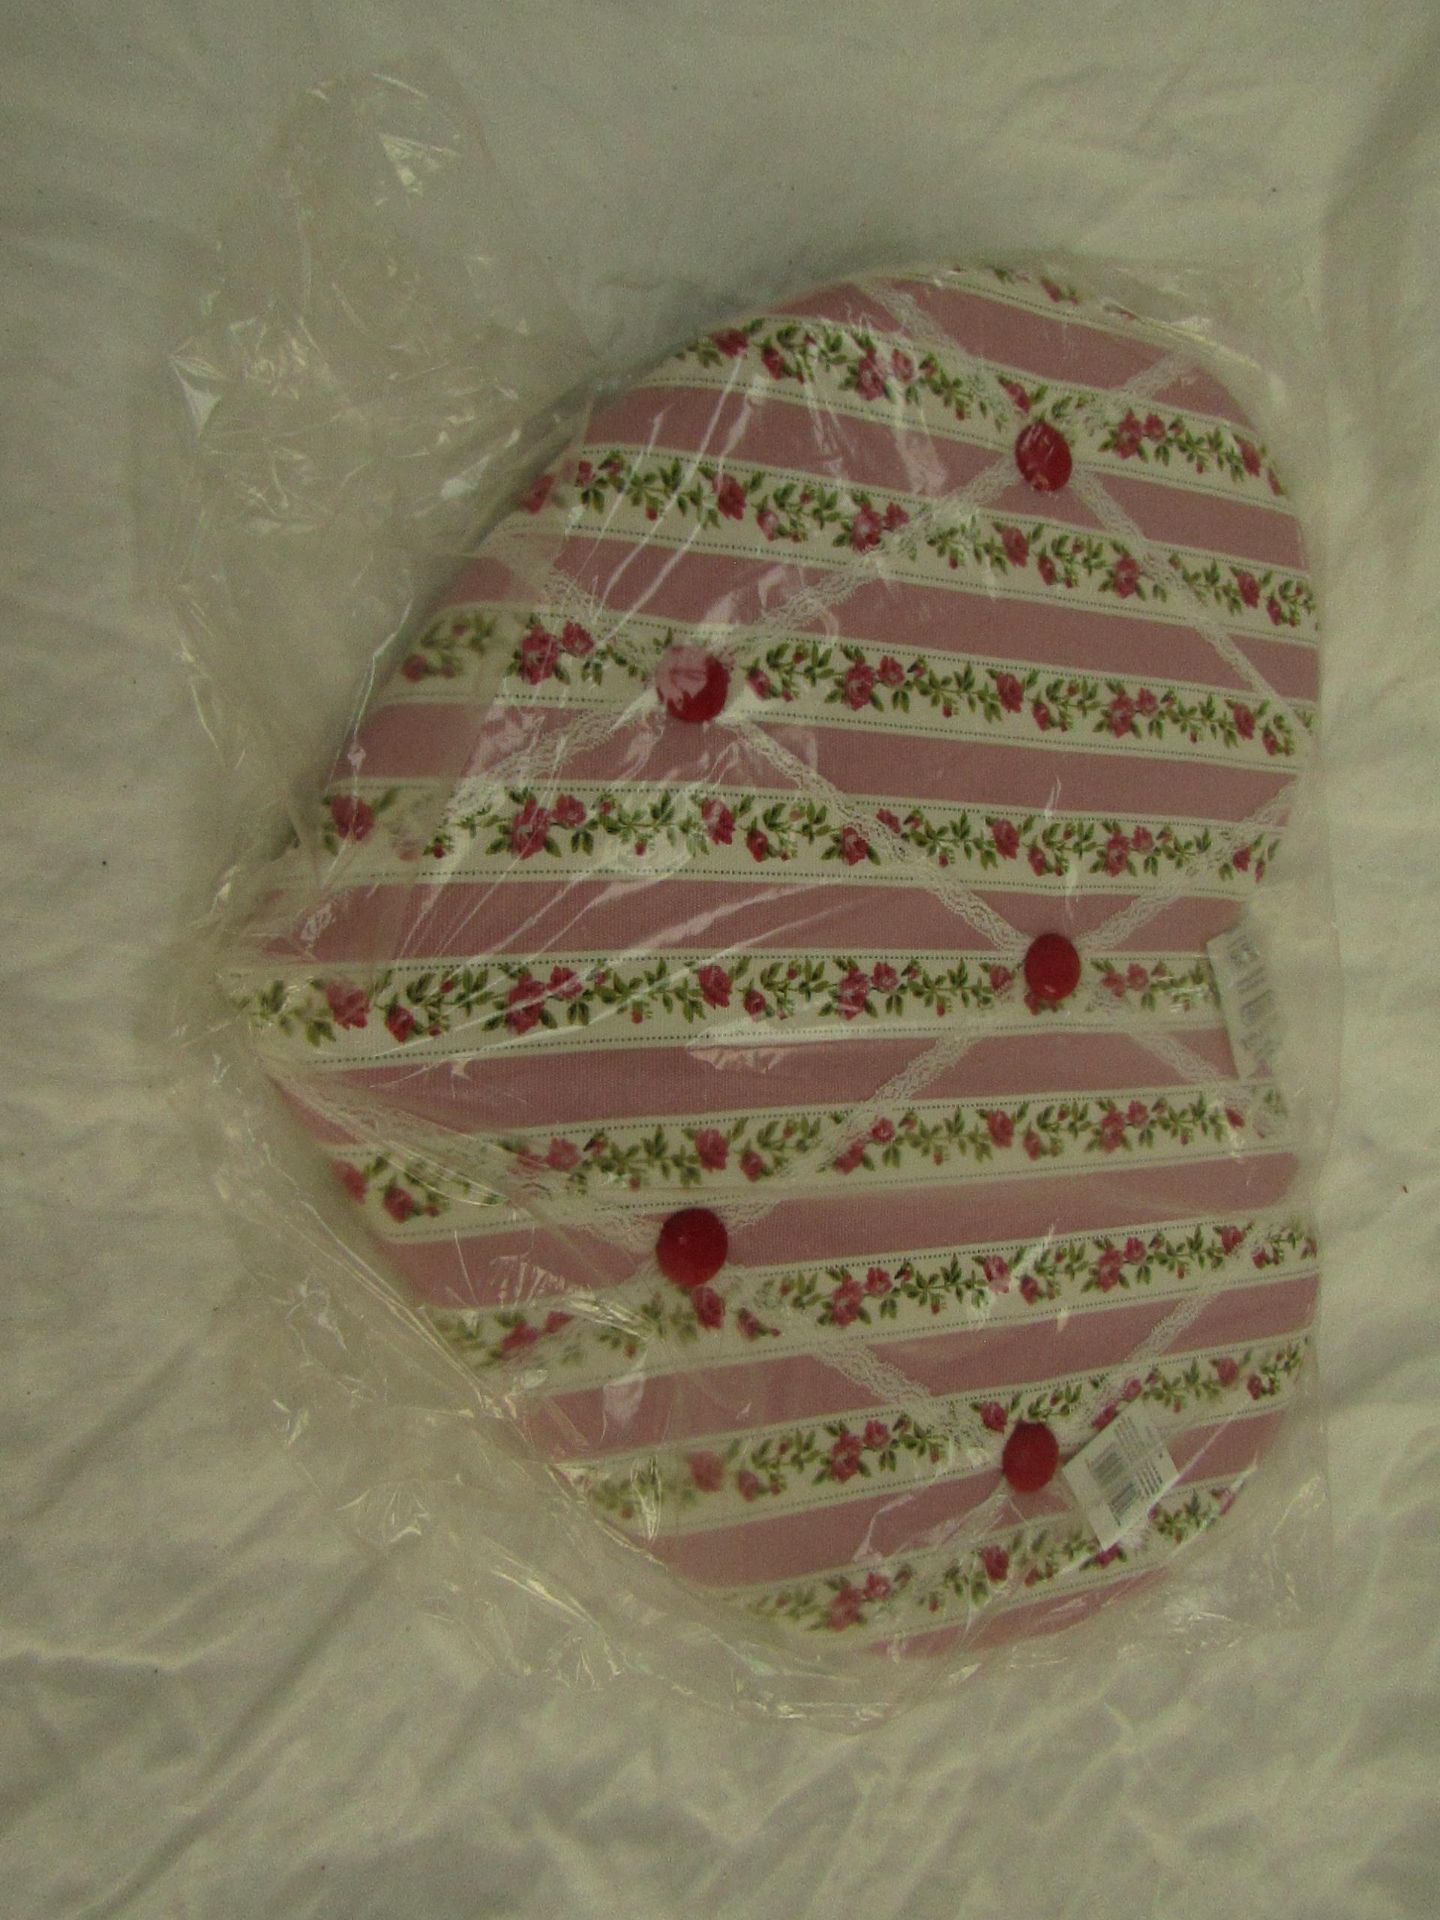 Candlelight - Pink Floral Heart Shaped Fabric Memo Board - New & Packaged.